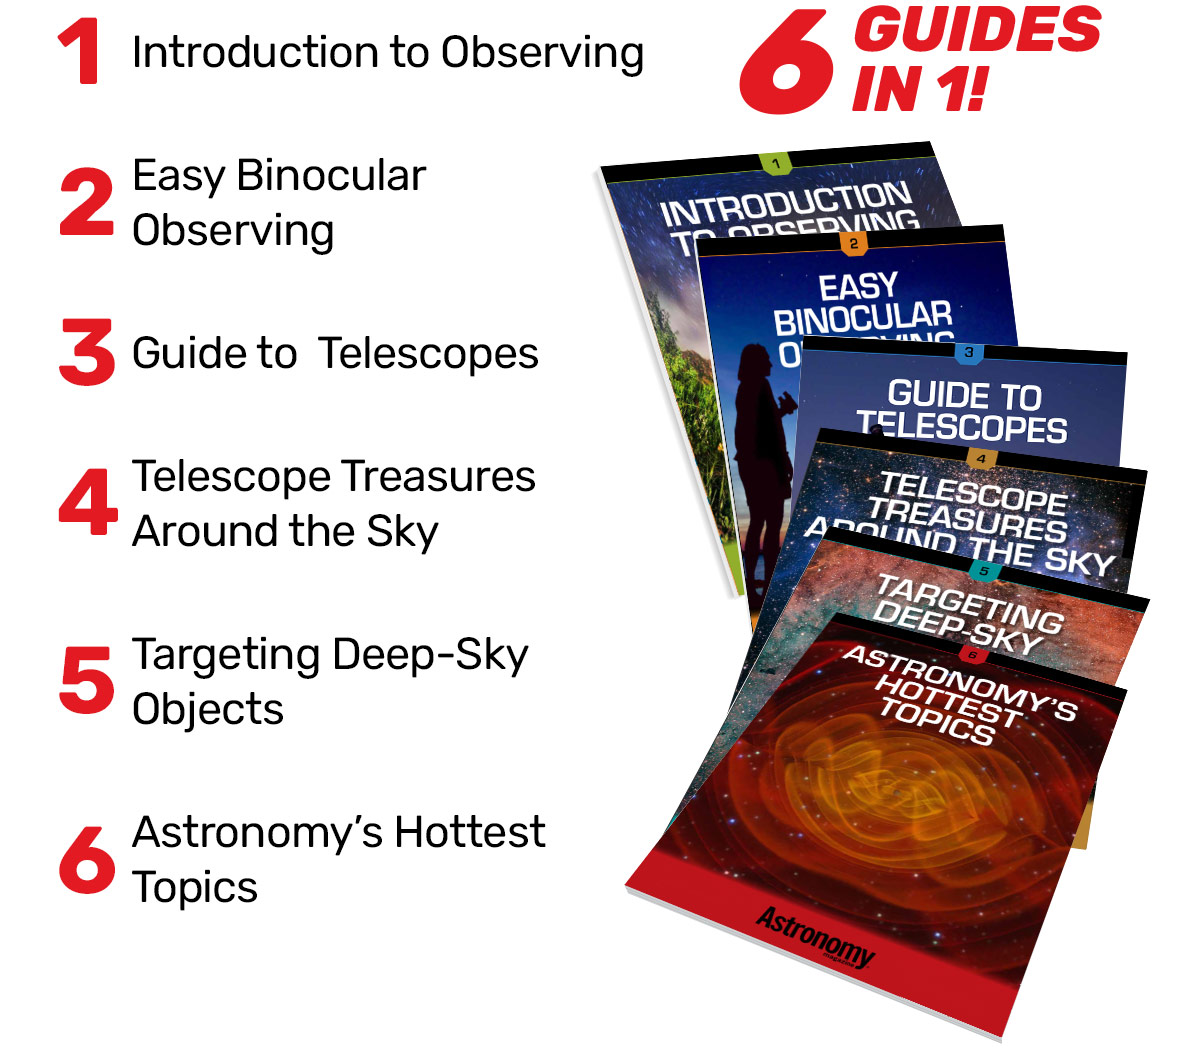 Get six guides in one now...